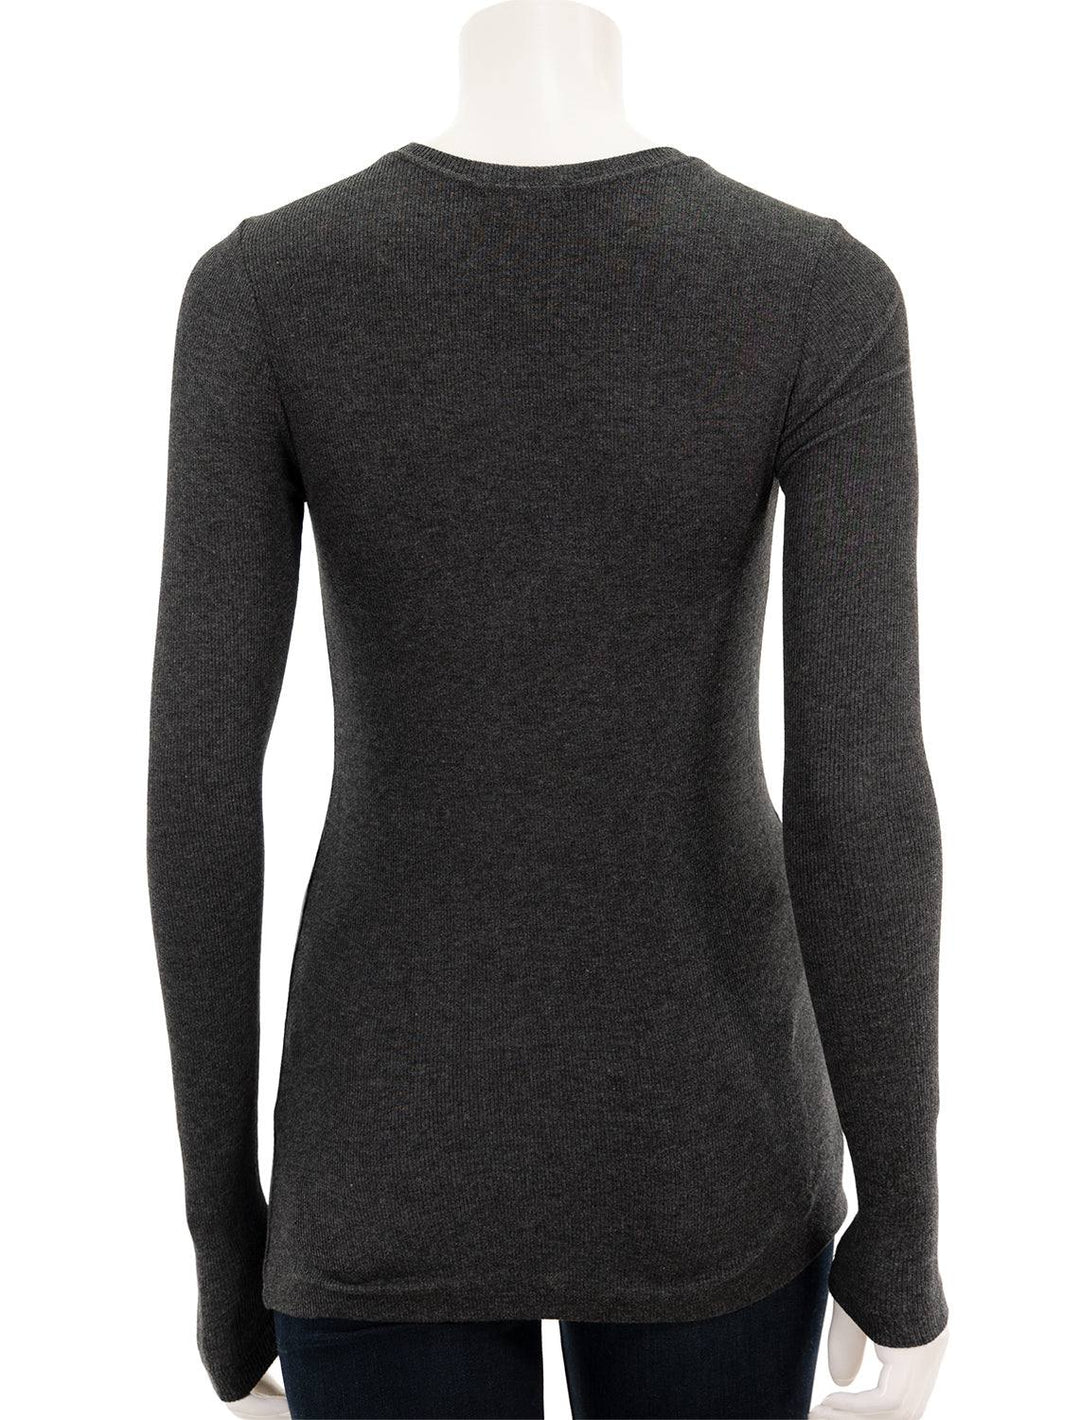 Back view of Goldie Lewinter's ribbed long sleeve tee in charcoal heather.